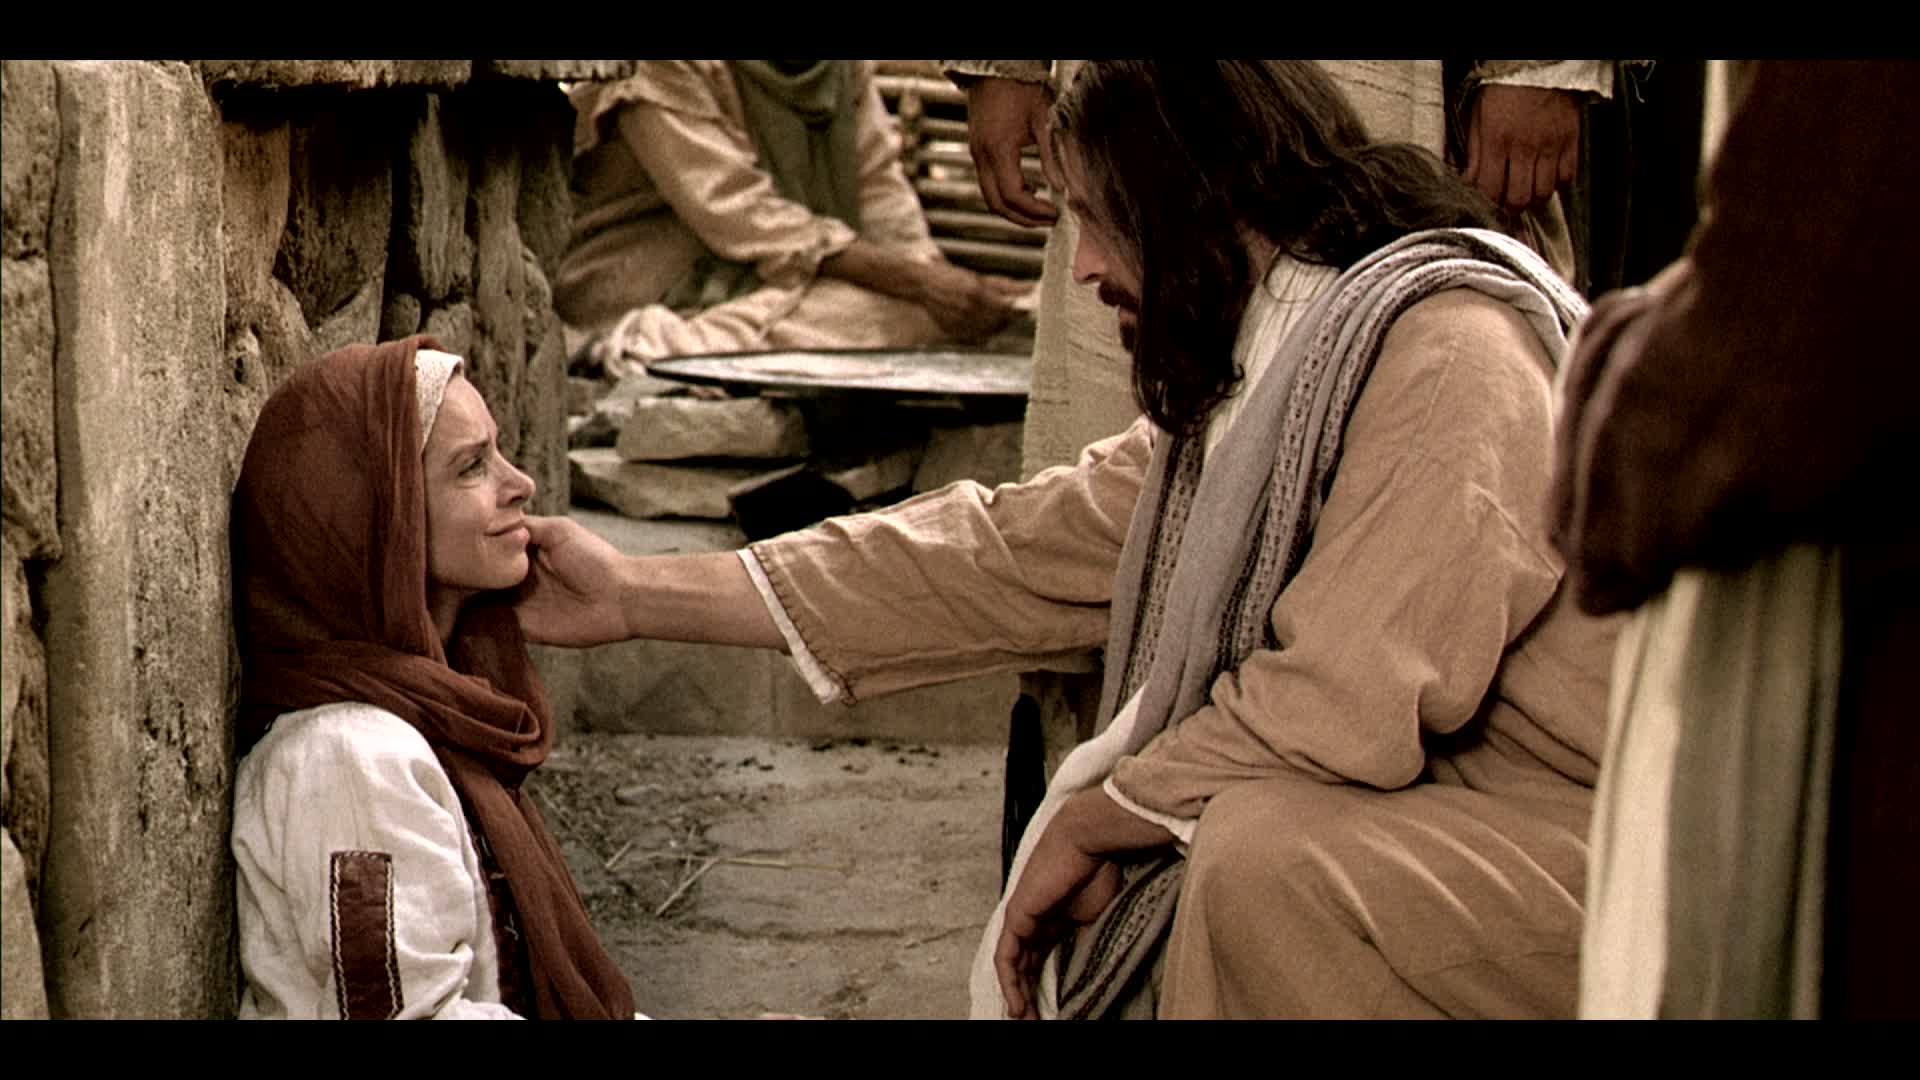 A photo of Jesus Christ kneeling before a woman sitting on the ground with his hand stretched out.